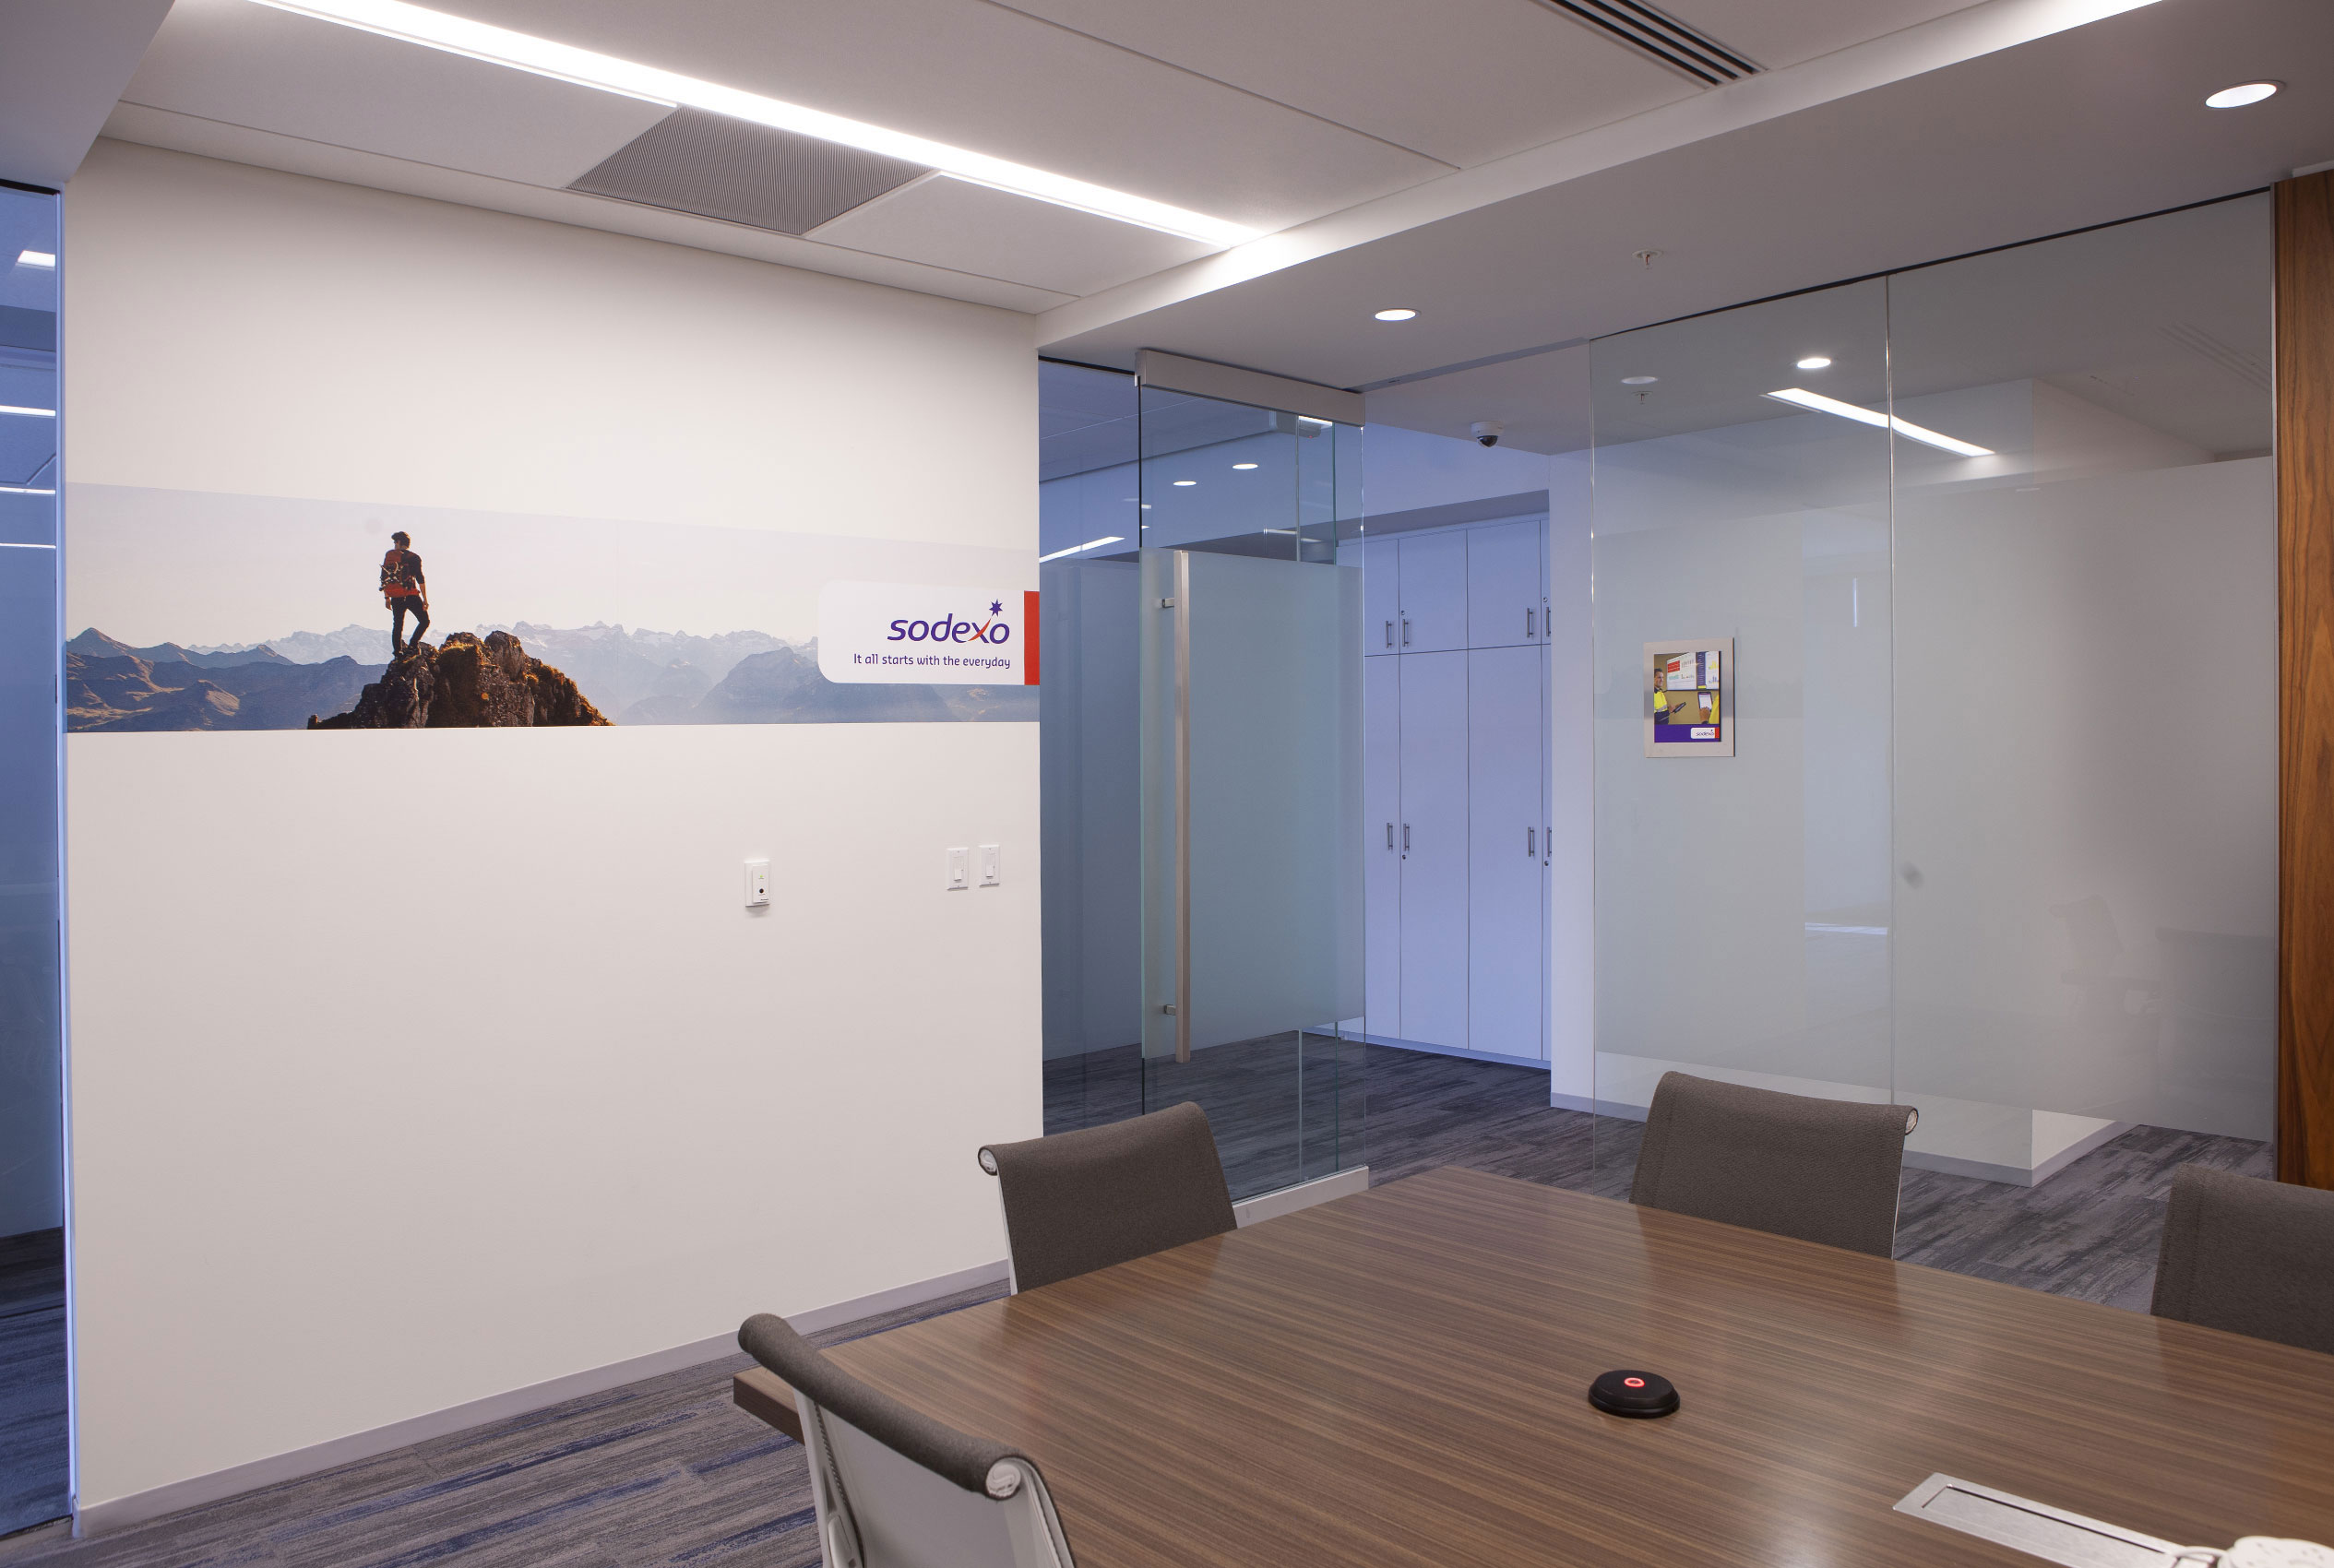 Conference room with photo of man on mountain and glass walls